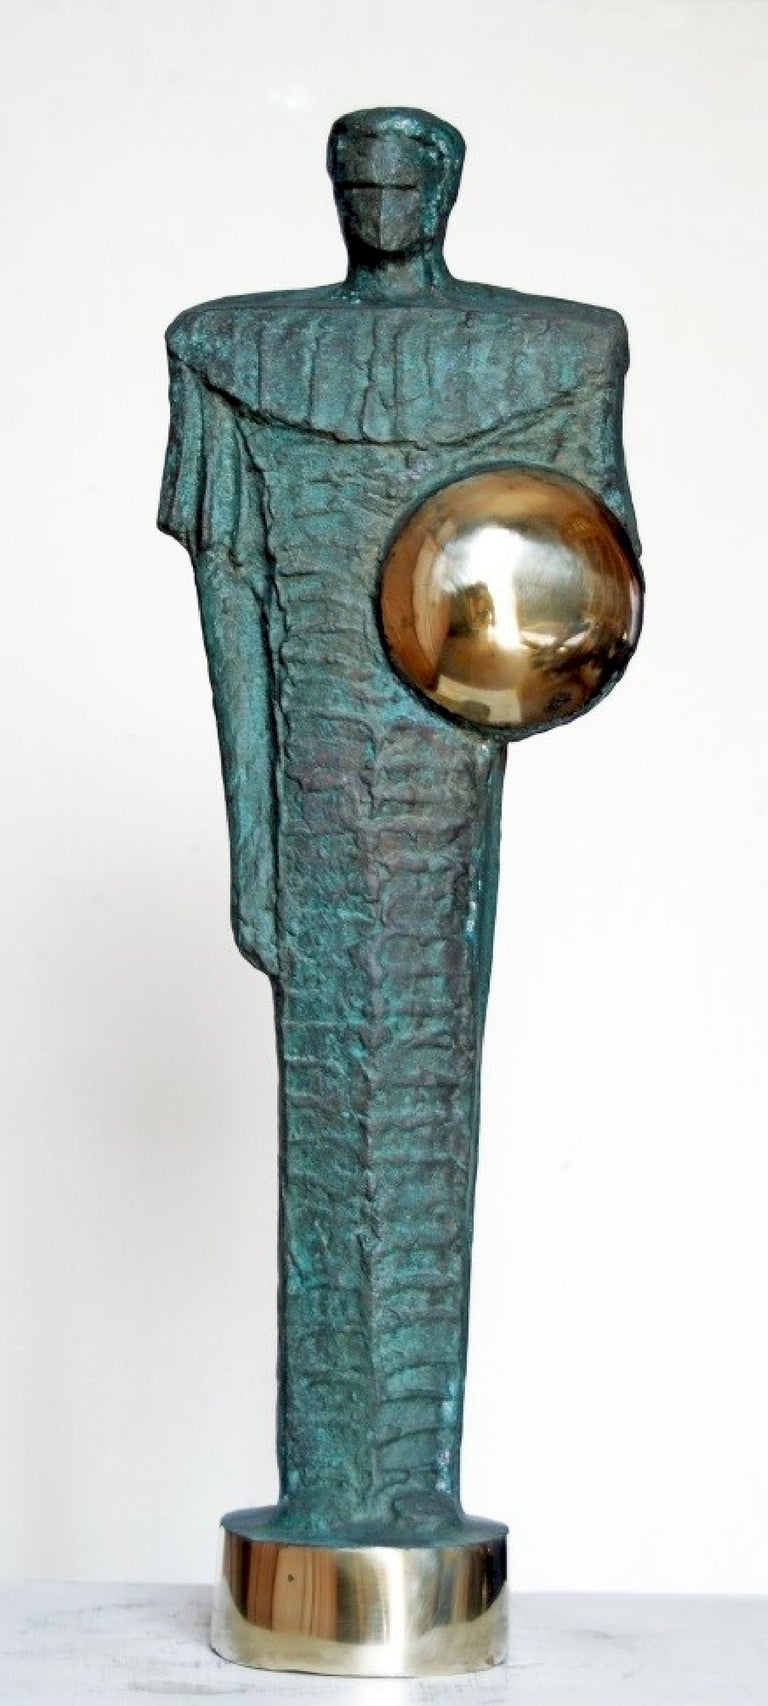 "Warrior" Bronze Sculpture 20" x 7" x 4" inch by Sarkis Tossonian	

* Due to the Ministry of Culture policy + COVID situation, handling time (paperwork) may take up to 1-3 month. 

Sarkis Tossoonian was born in Alexandria in 1953. He graduated from